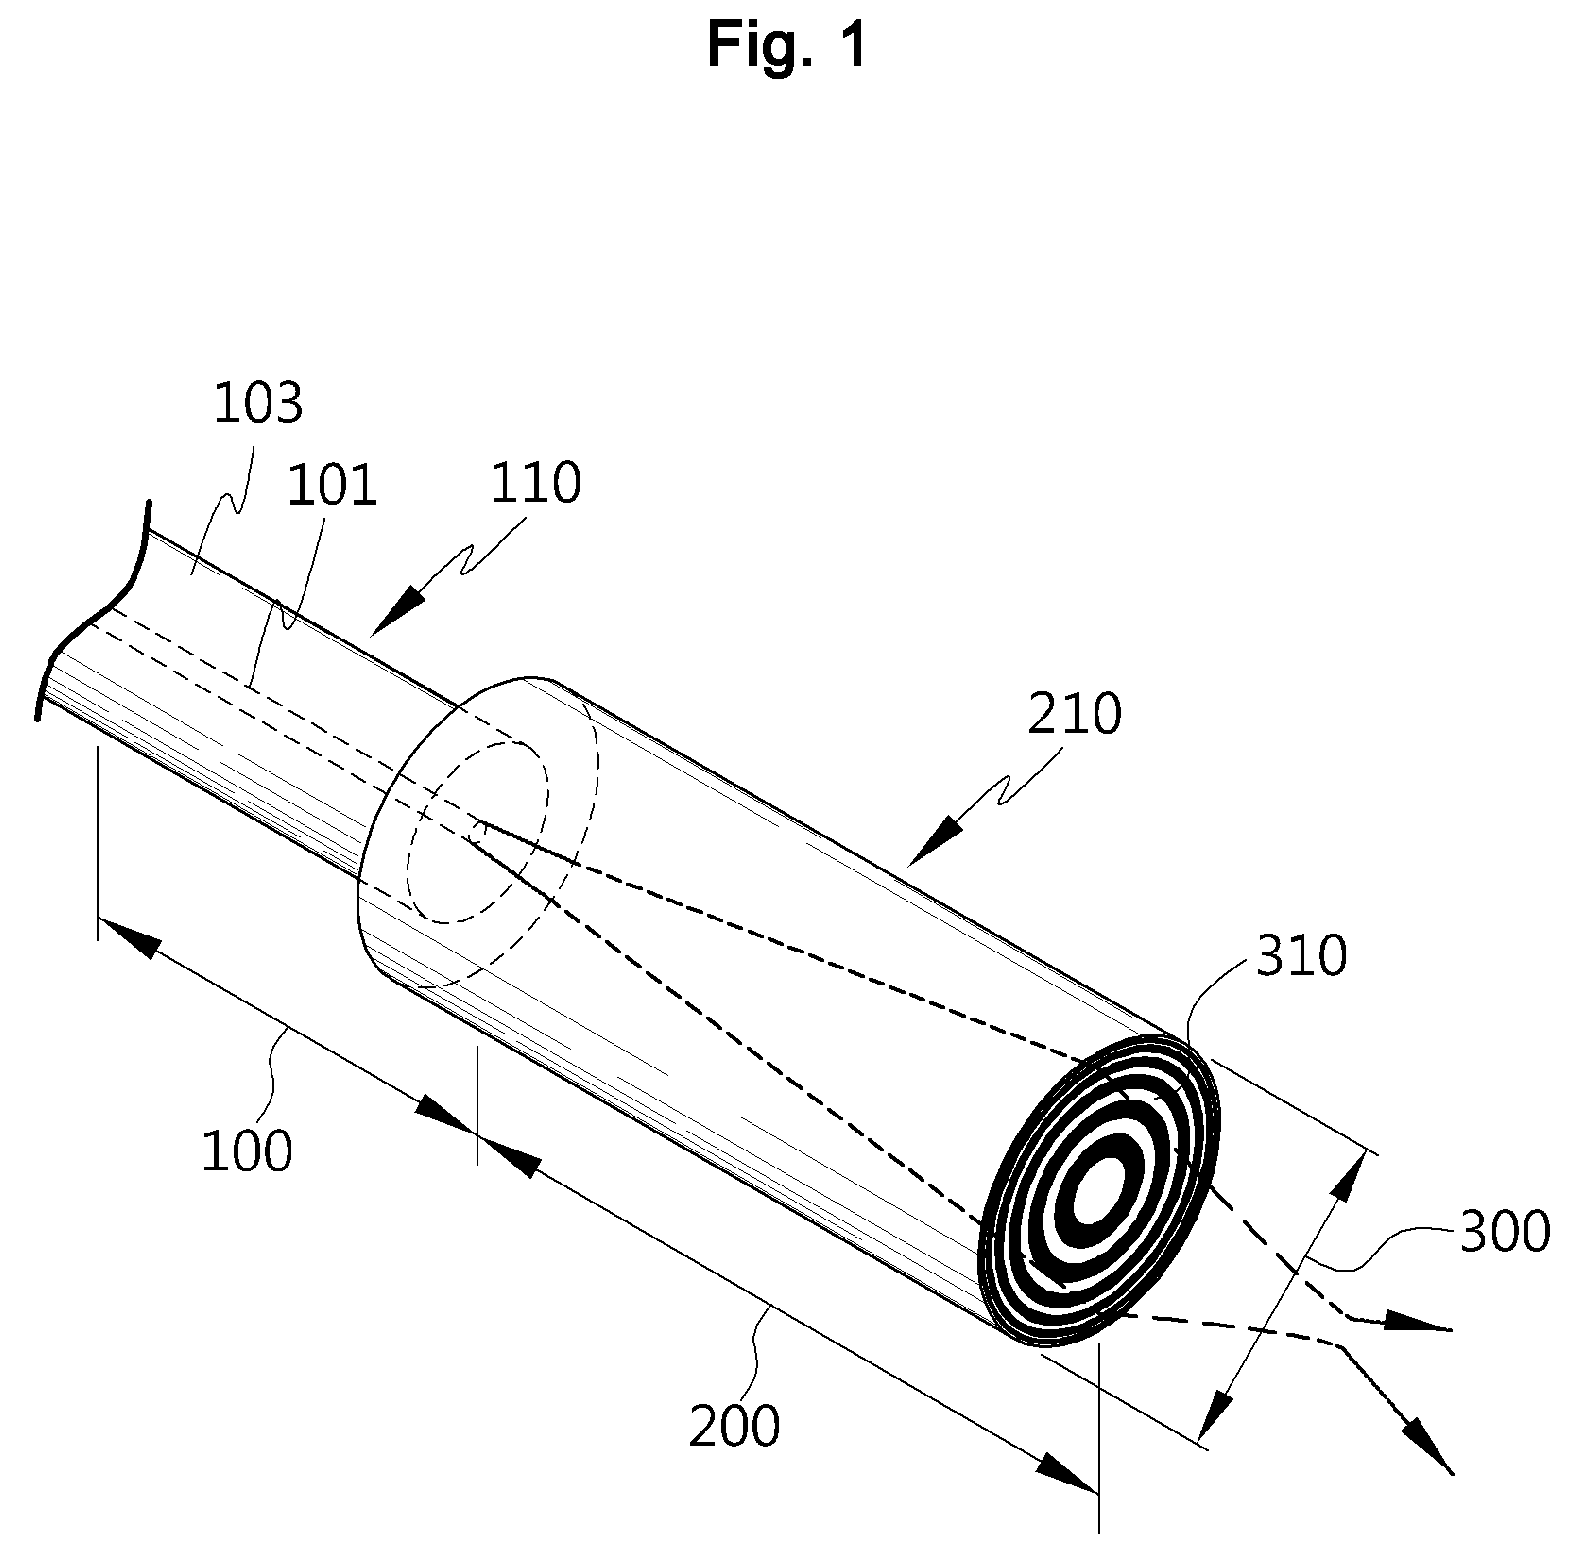 Fiber lens with fresnel zone plate lens and method for producing the same